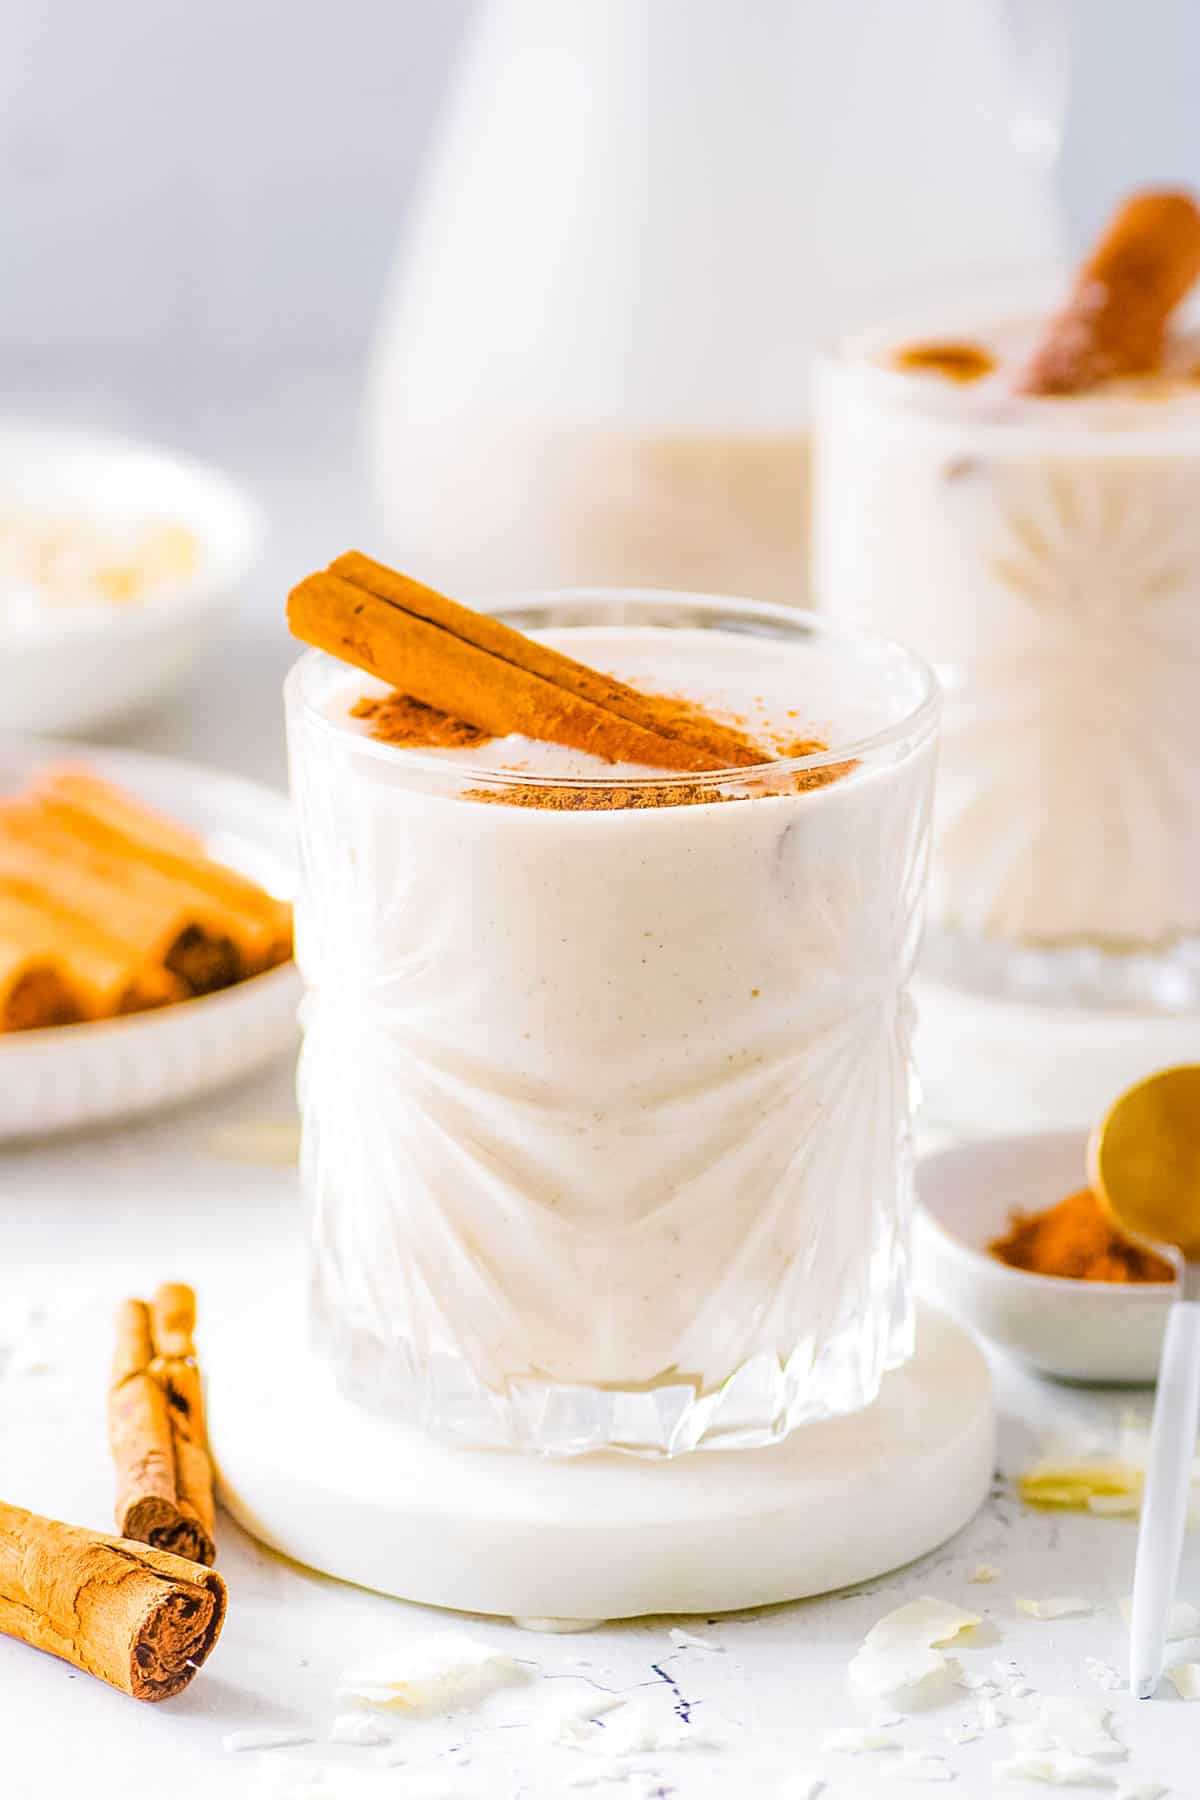 Vegan coquito served in a gl، with a cinnamon stick as a garnish.